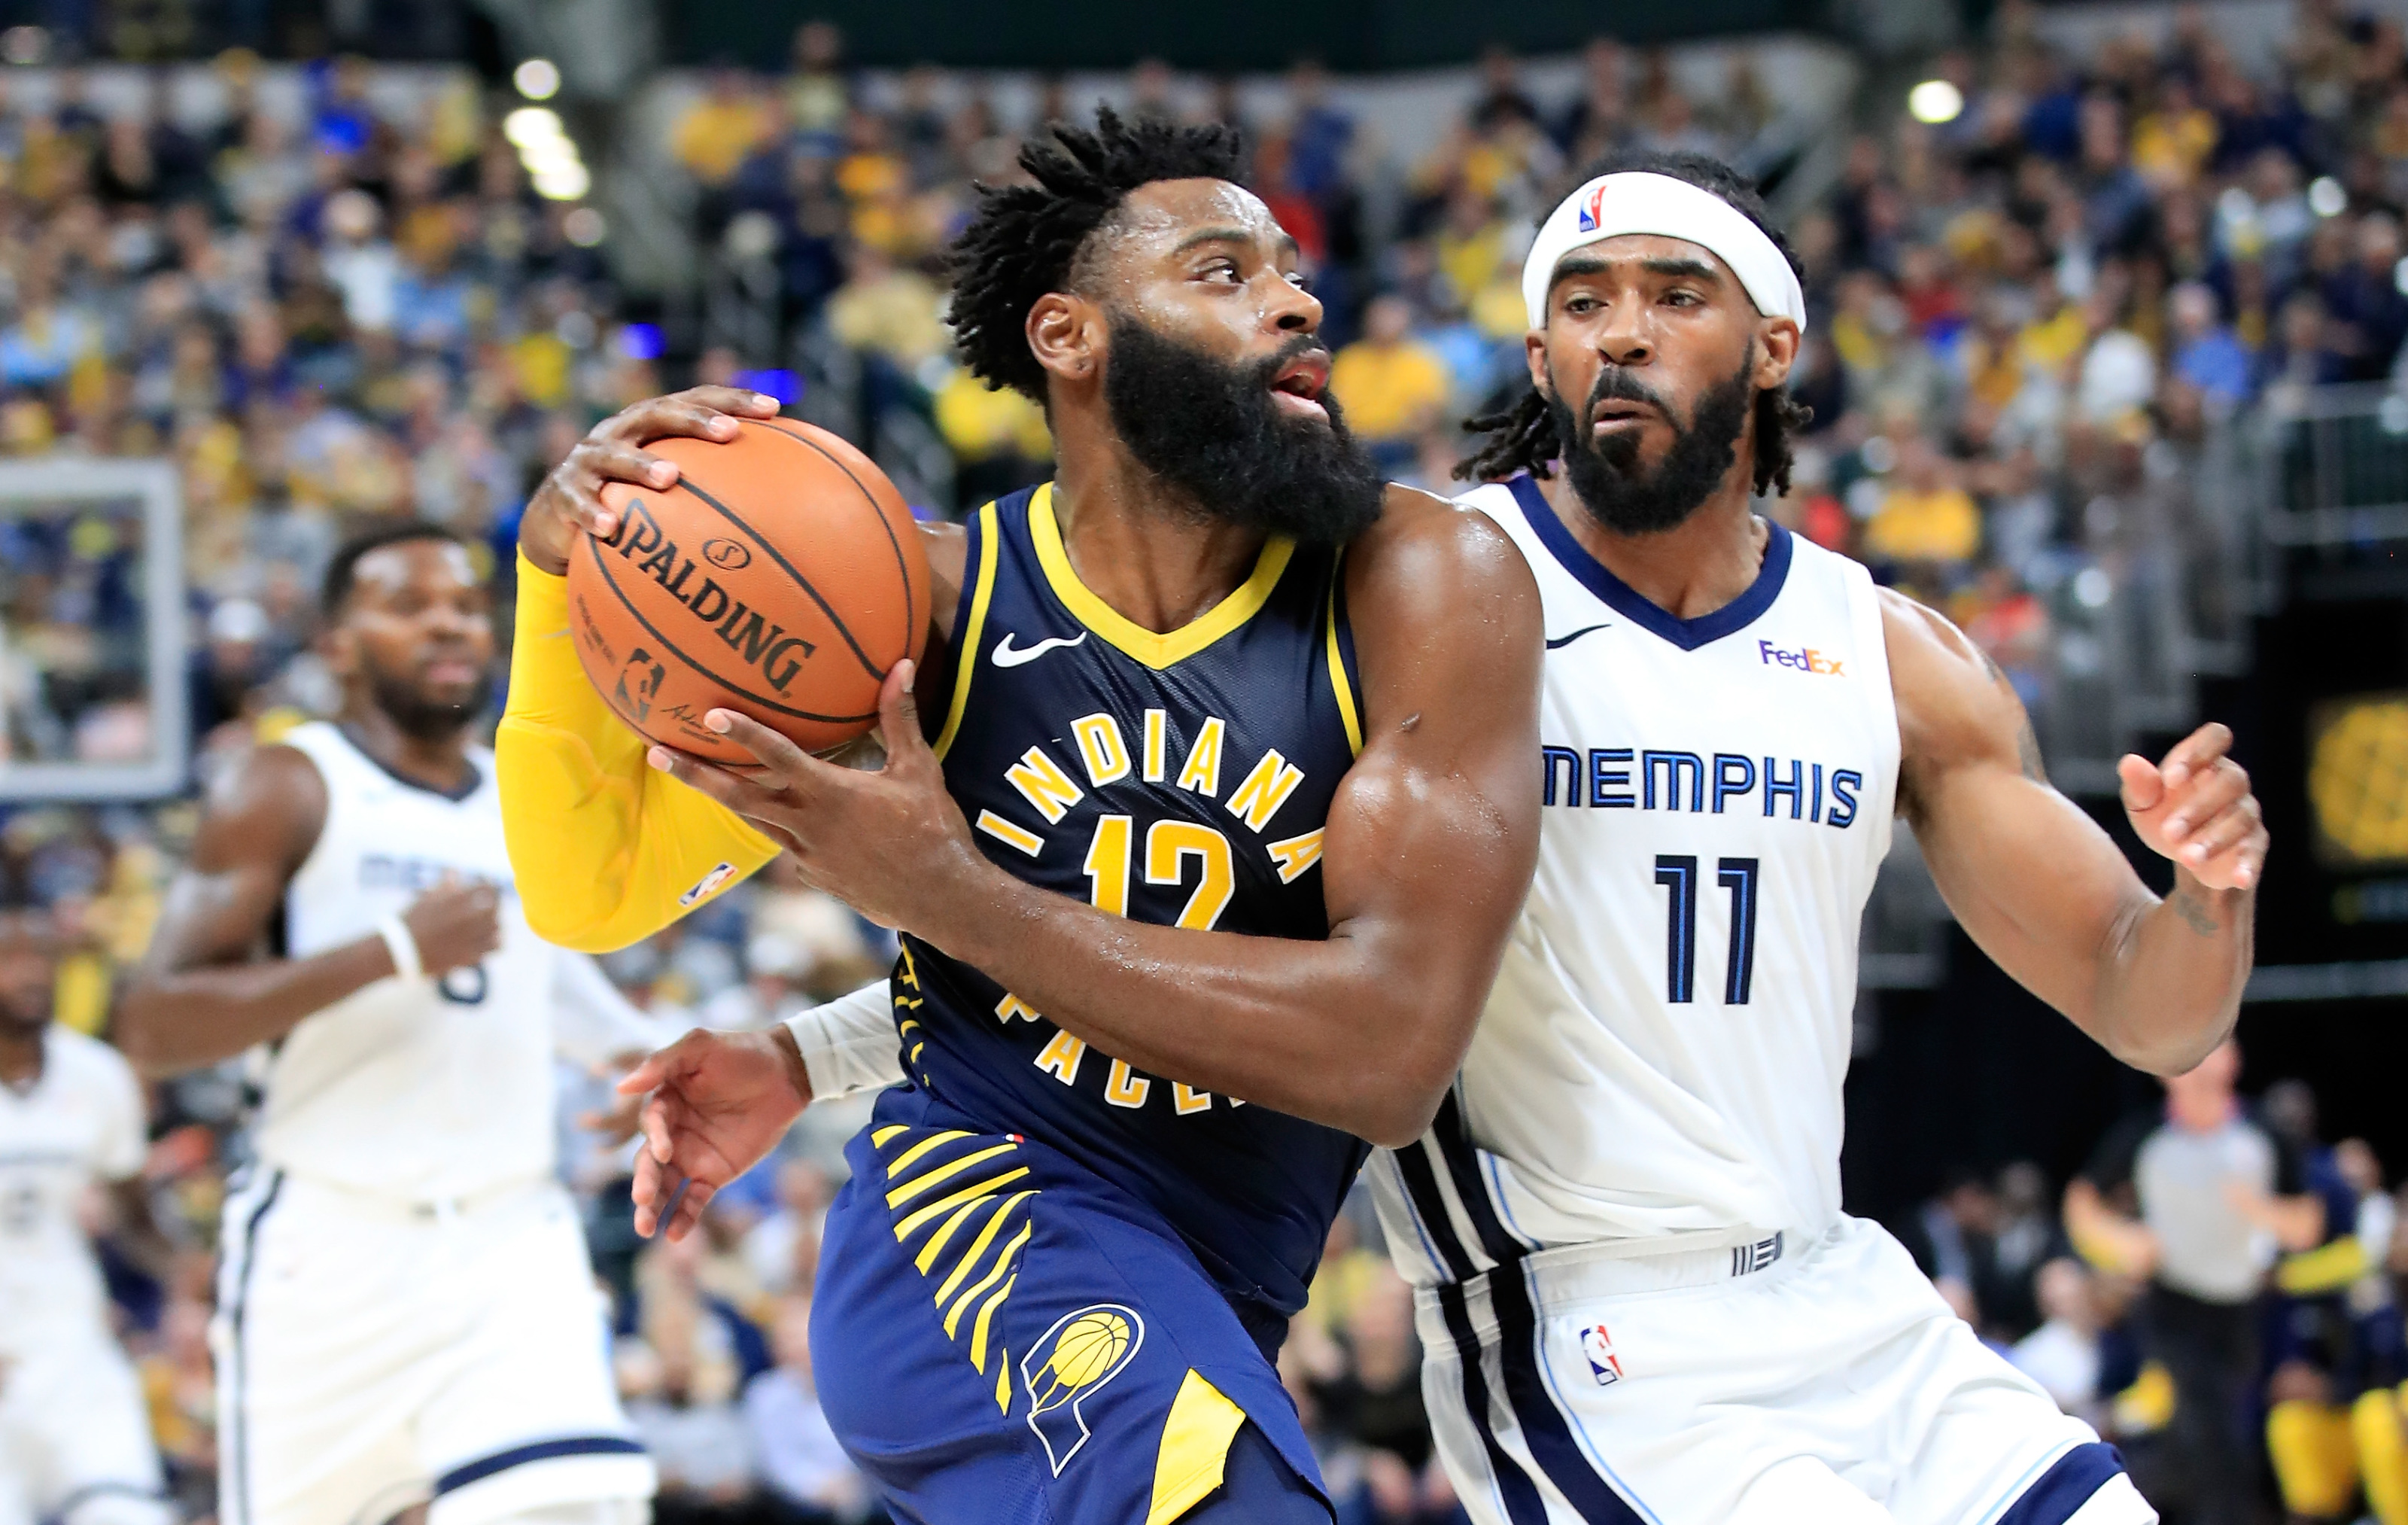 Best photos from the Pacers hosting the Grizzlies